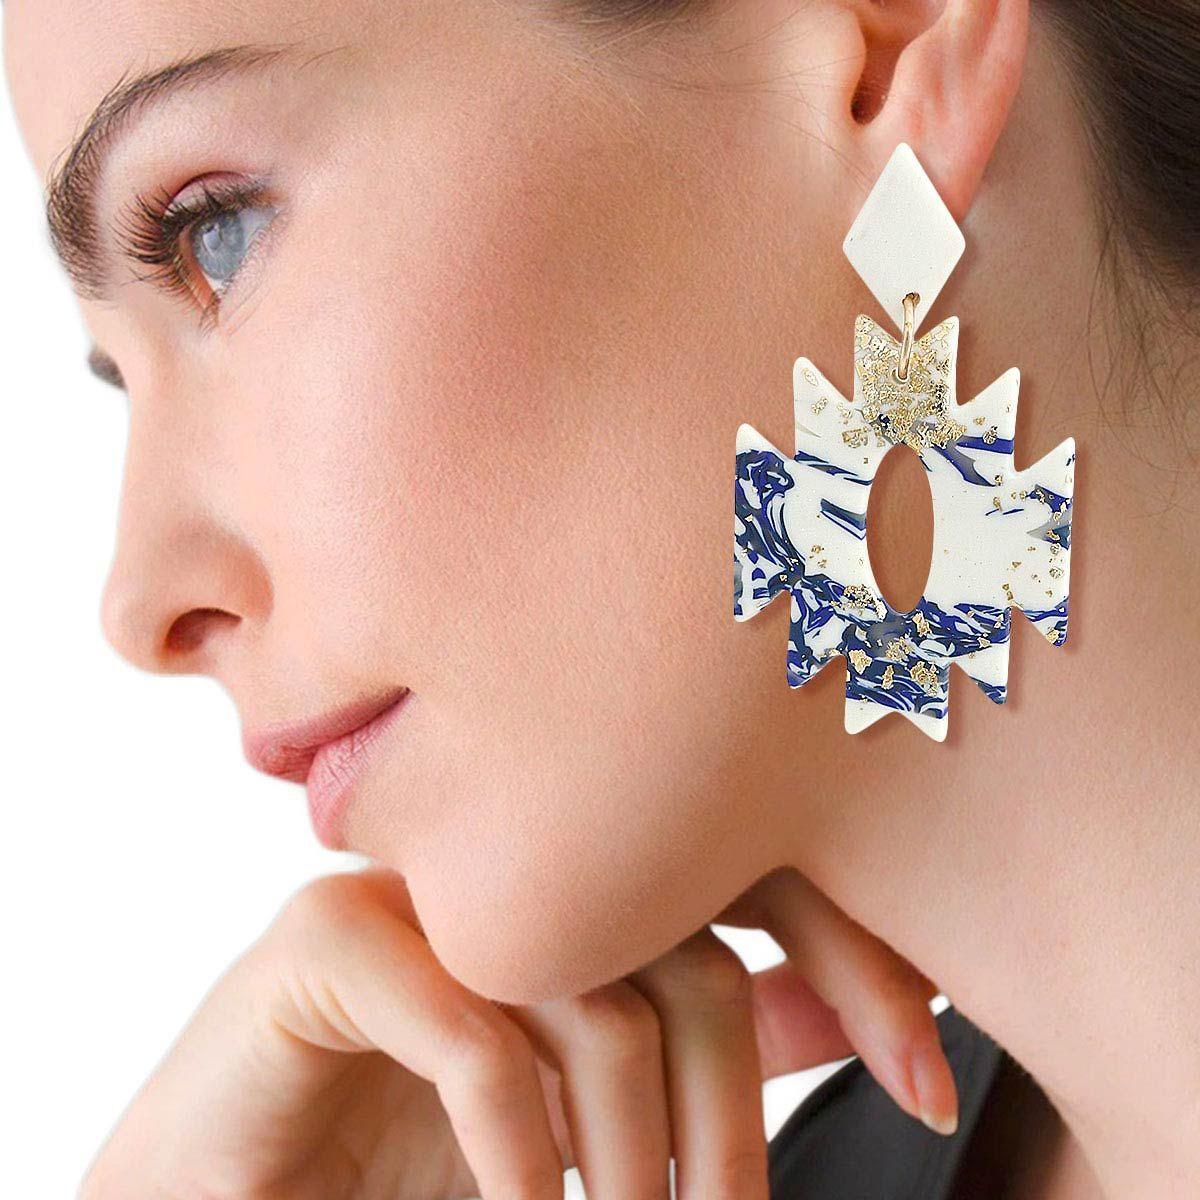 Get Noticed with Stunning Blue and White Zig-Zag Earrings